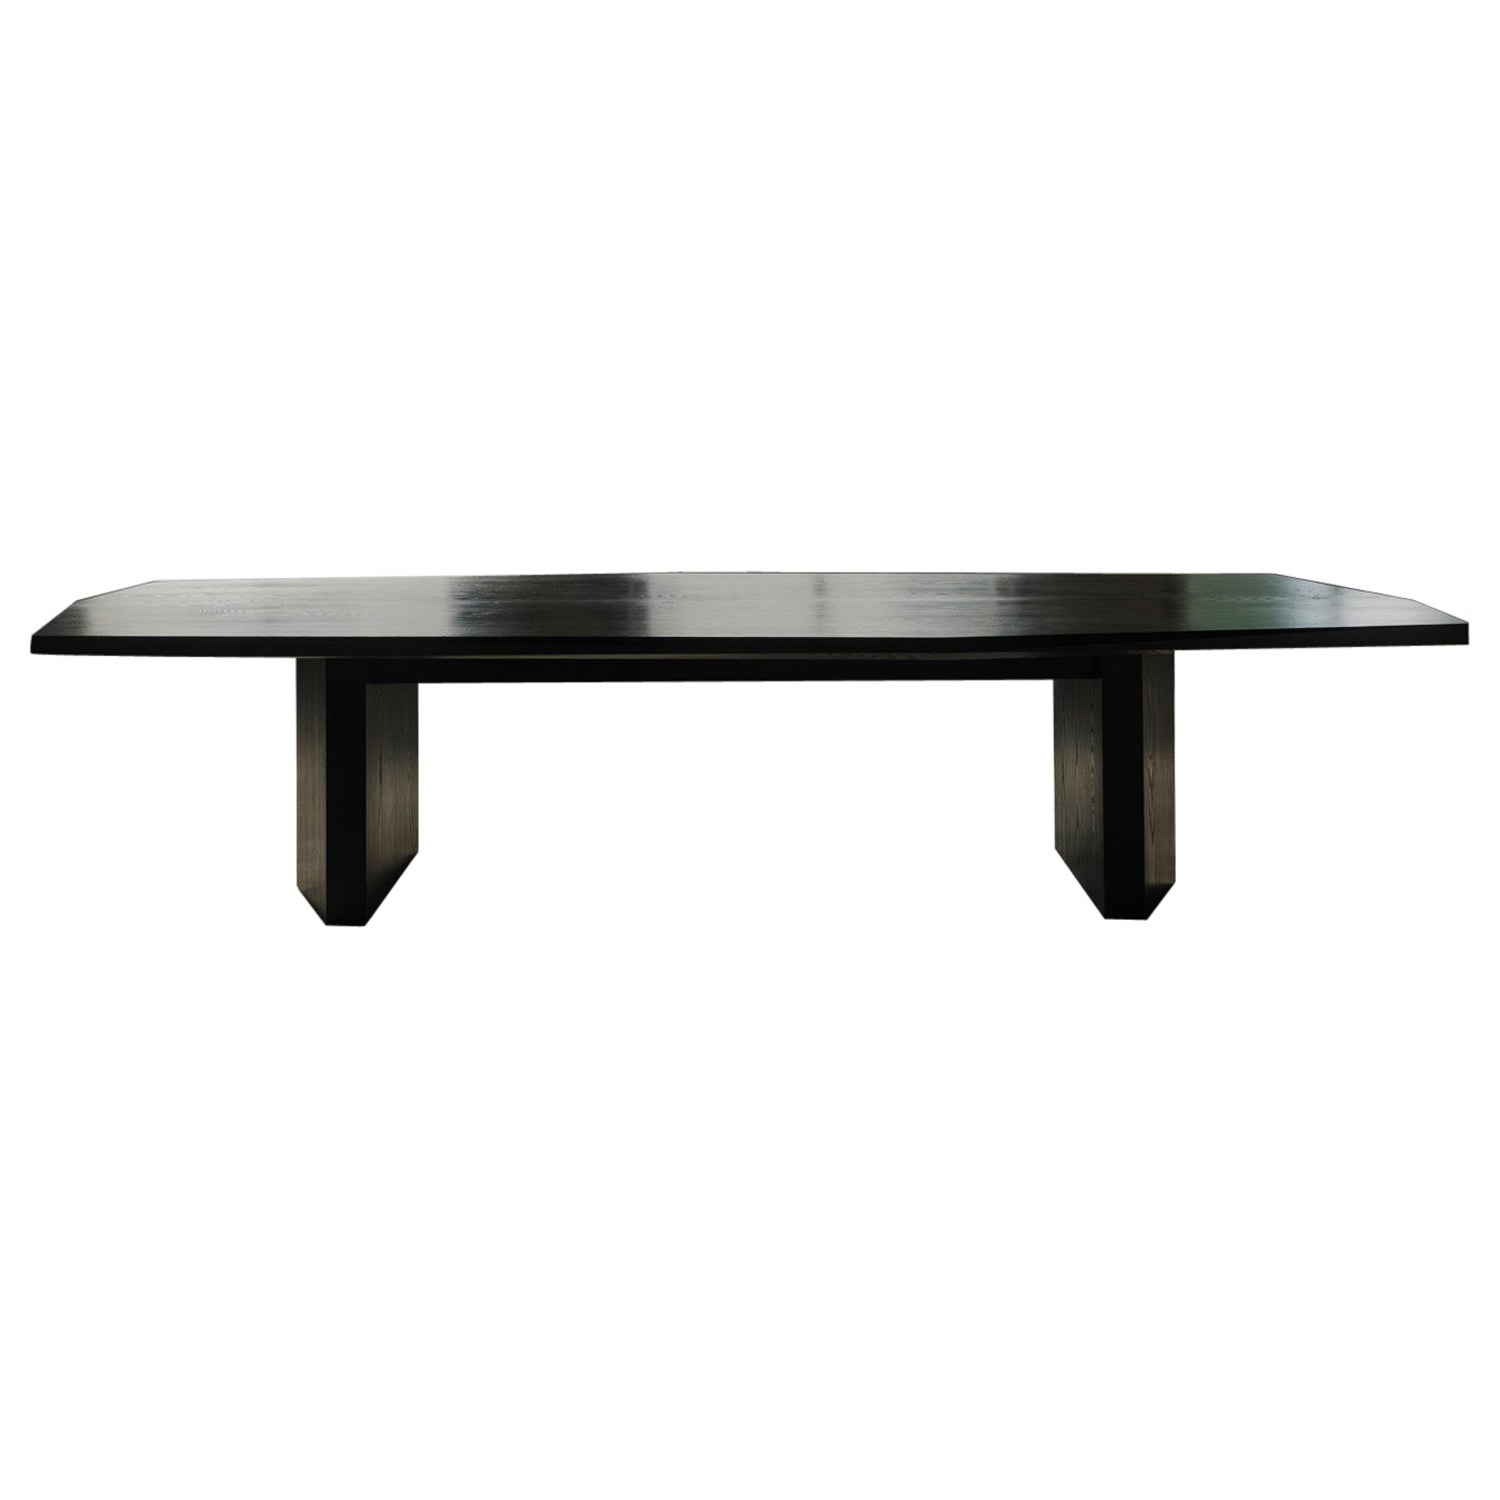 Contemporary Solid Black Ash Hera Dining Table by Tim Vranken For Sale